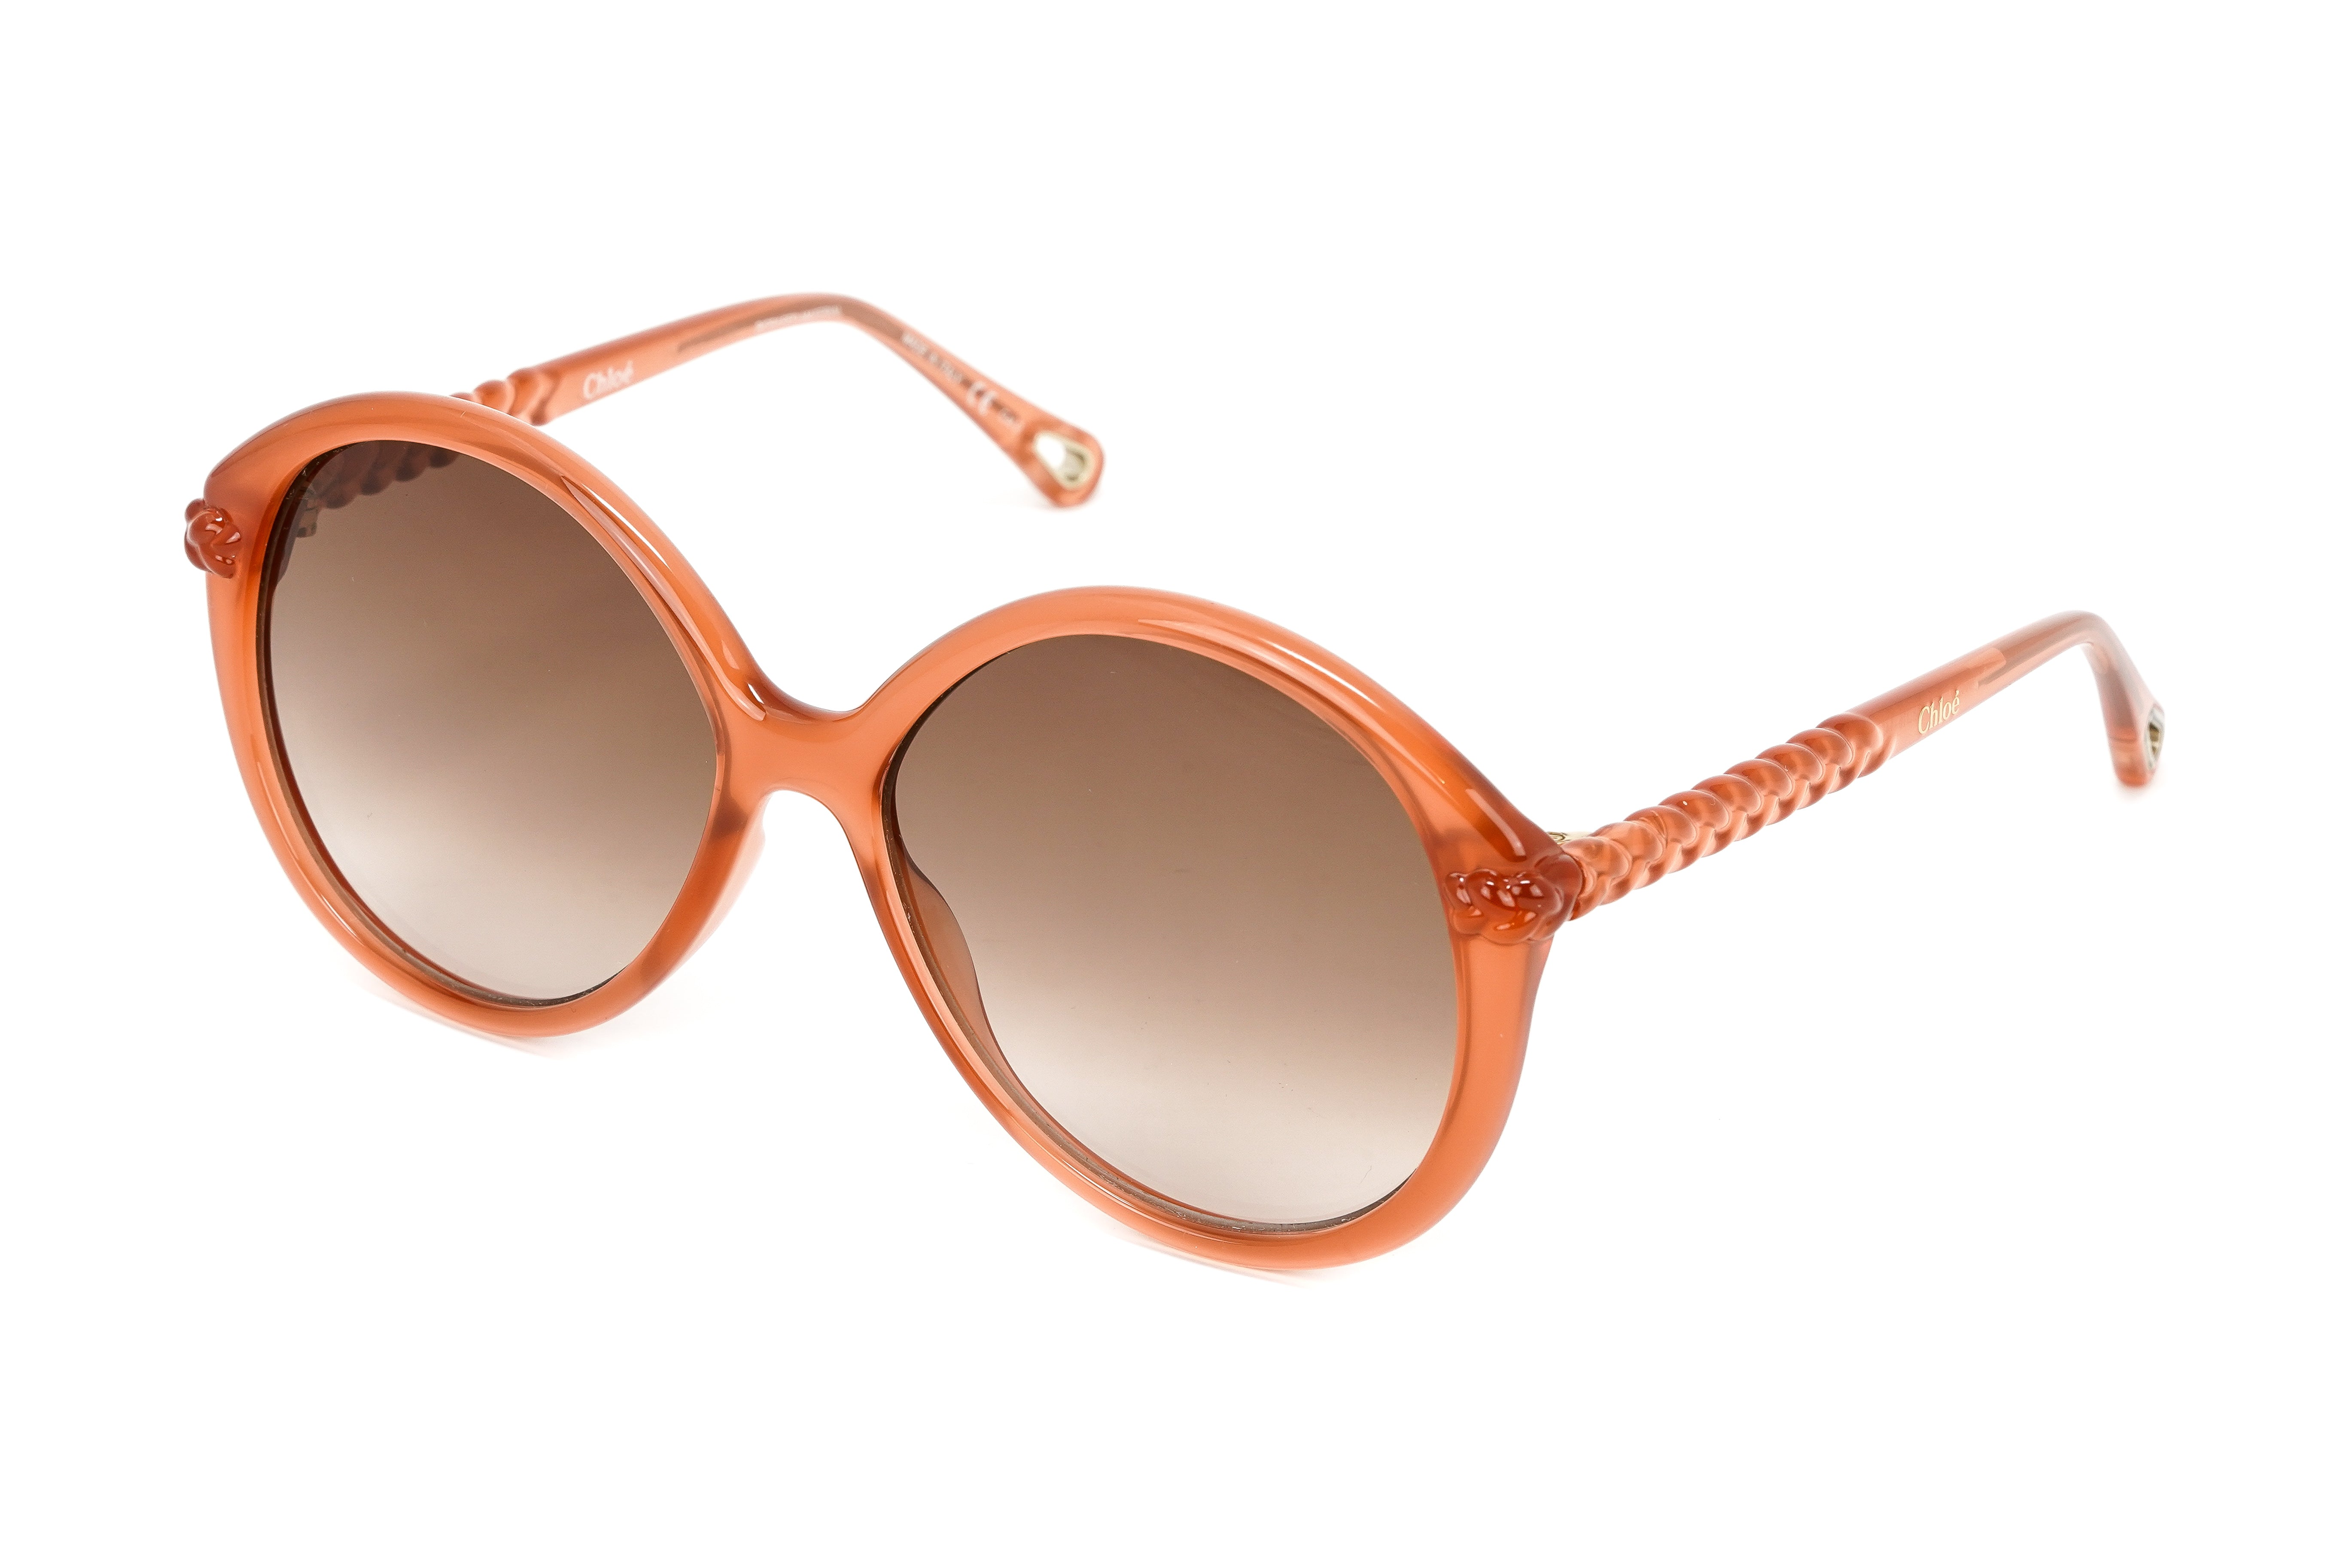 Chloé Women's Sunglasses Oversized Round Pink/Brown CH0002S-003 58